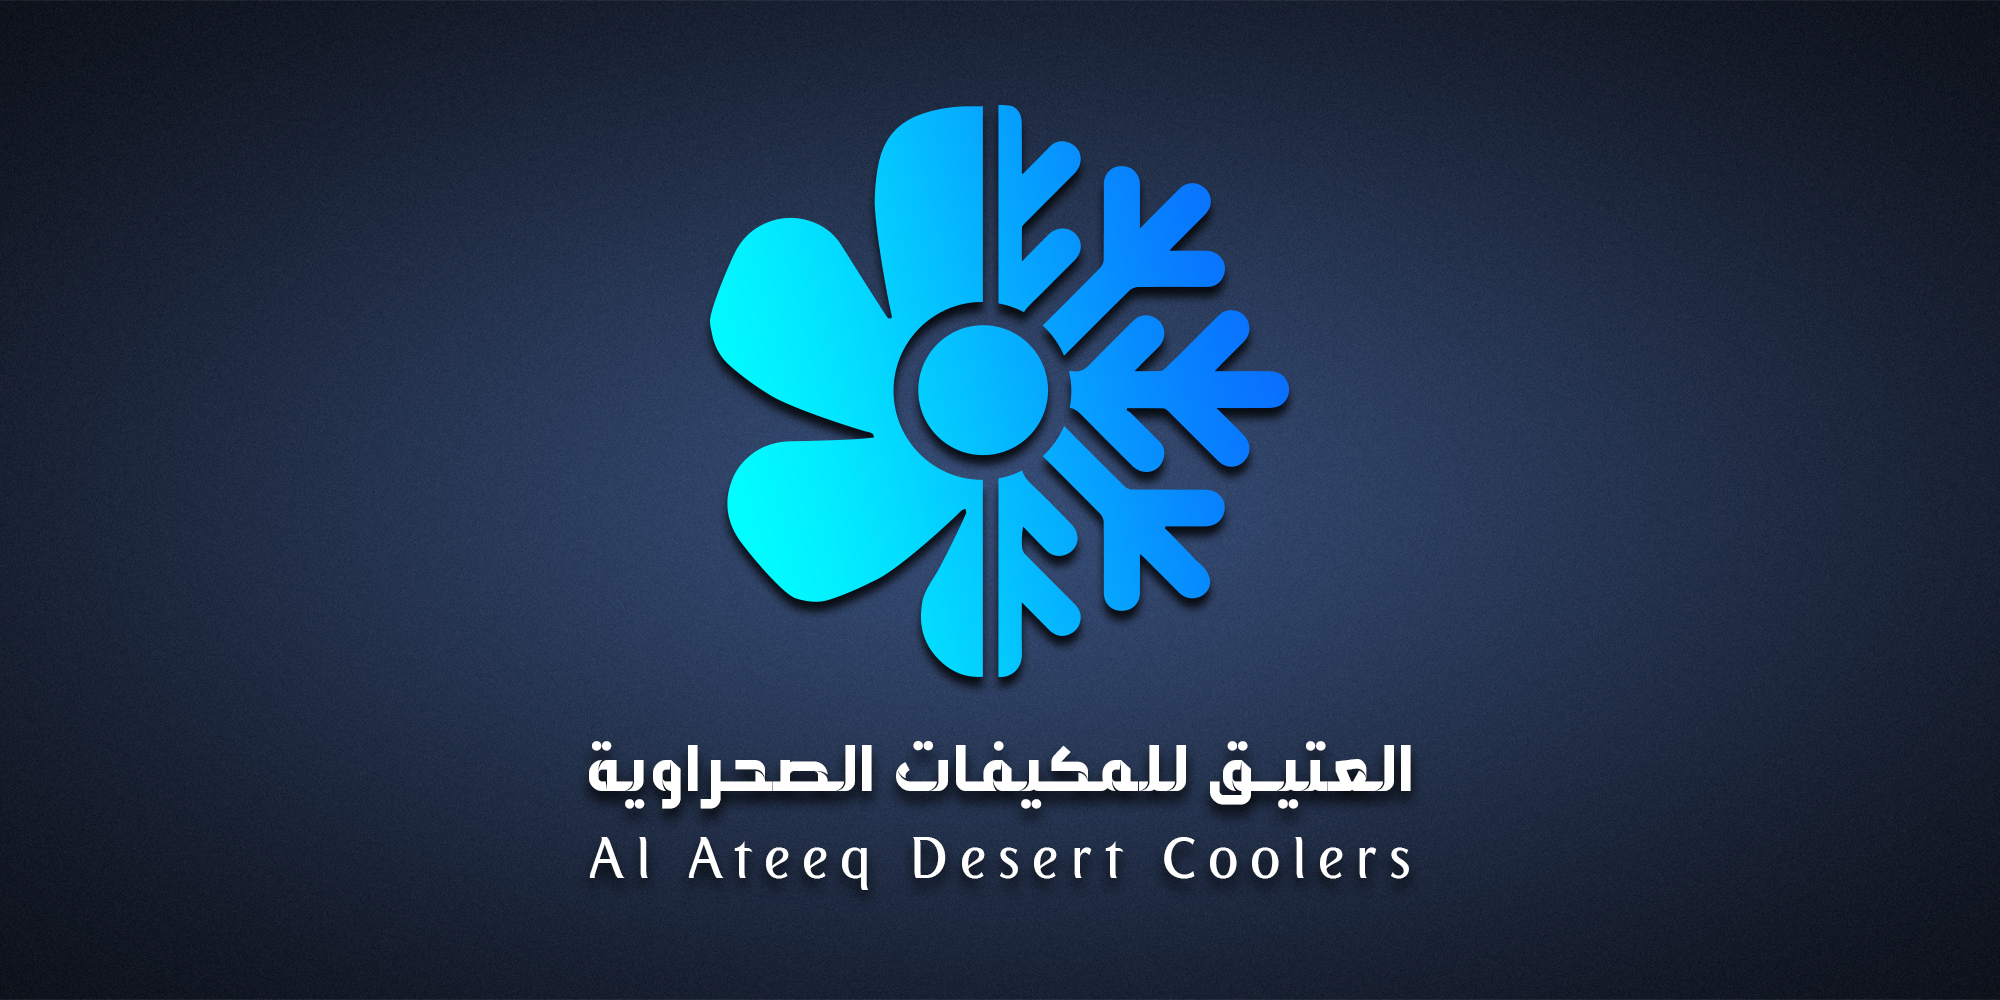 Al Ateeq Factory For Desert Coolers